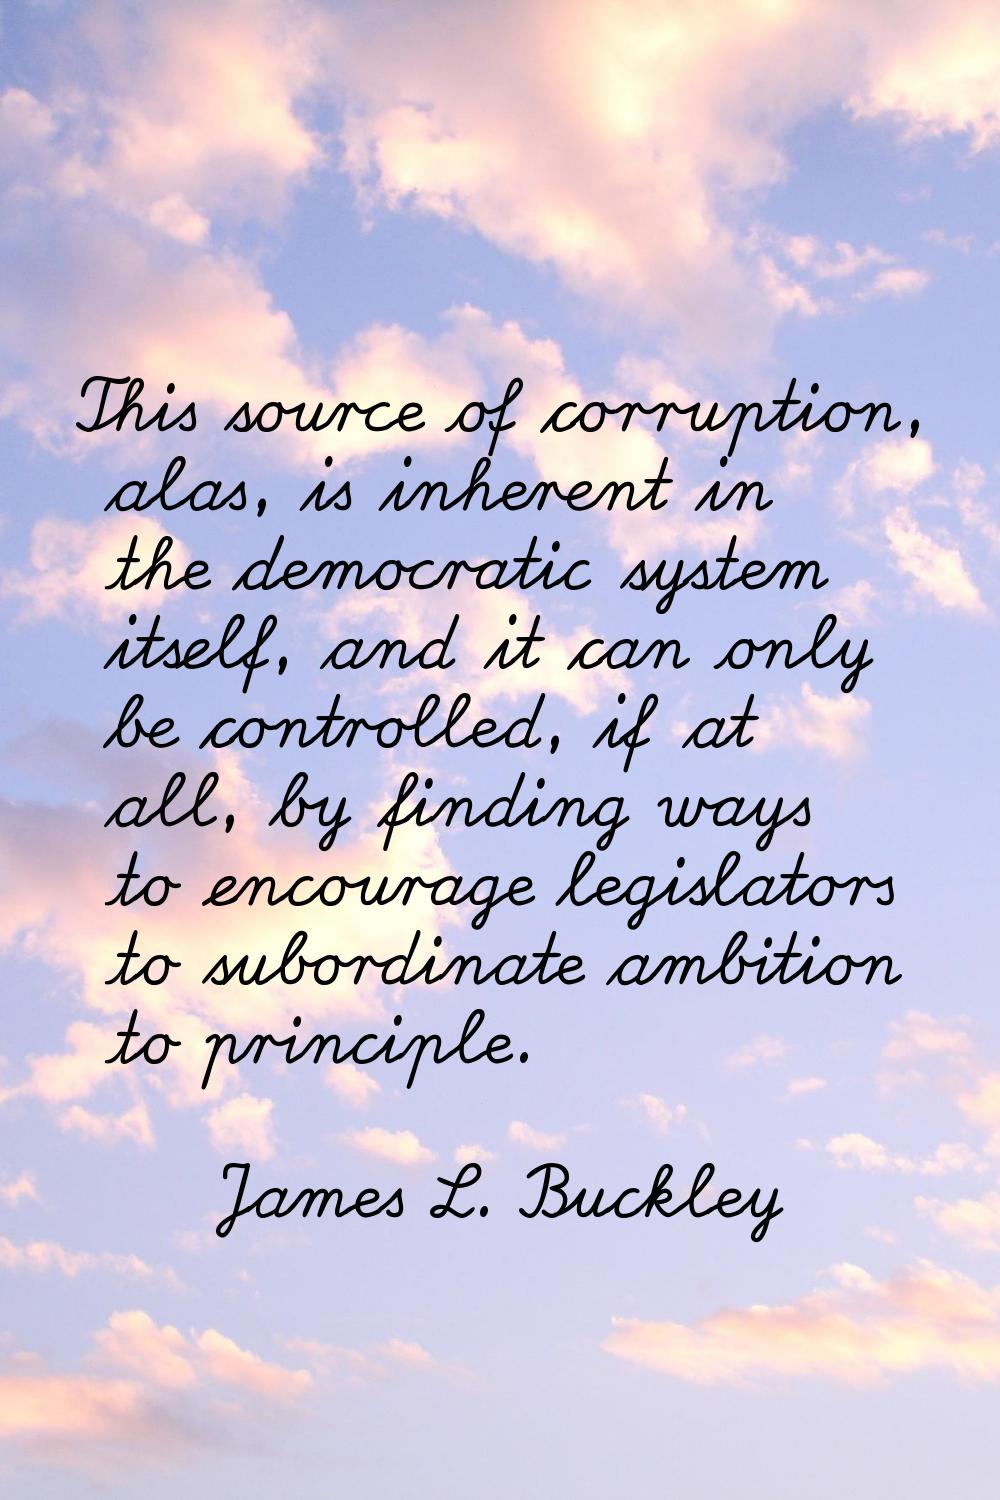 This source of corruption, alas, is inherent in the democratic system itself, and it can only be co